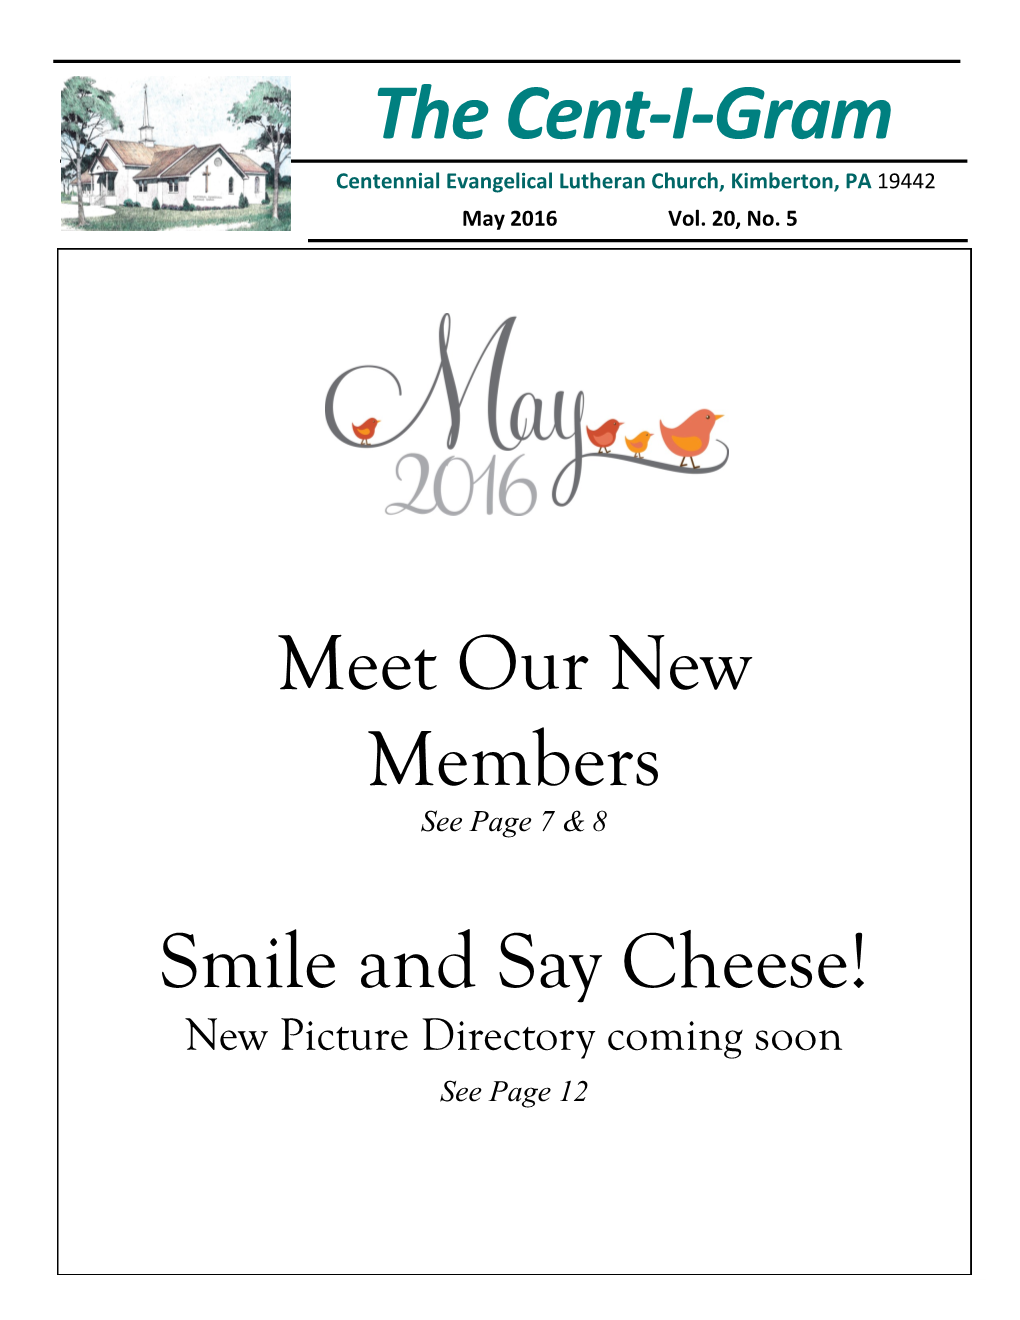 The Cent-I-Gram Meet Our New Members Smile and Say Cheese!